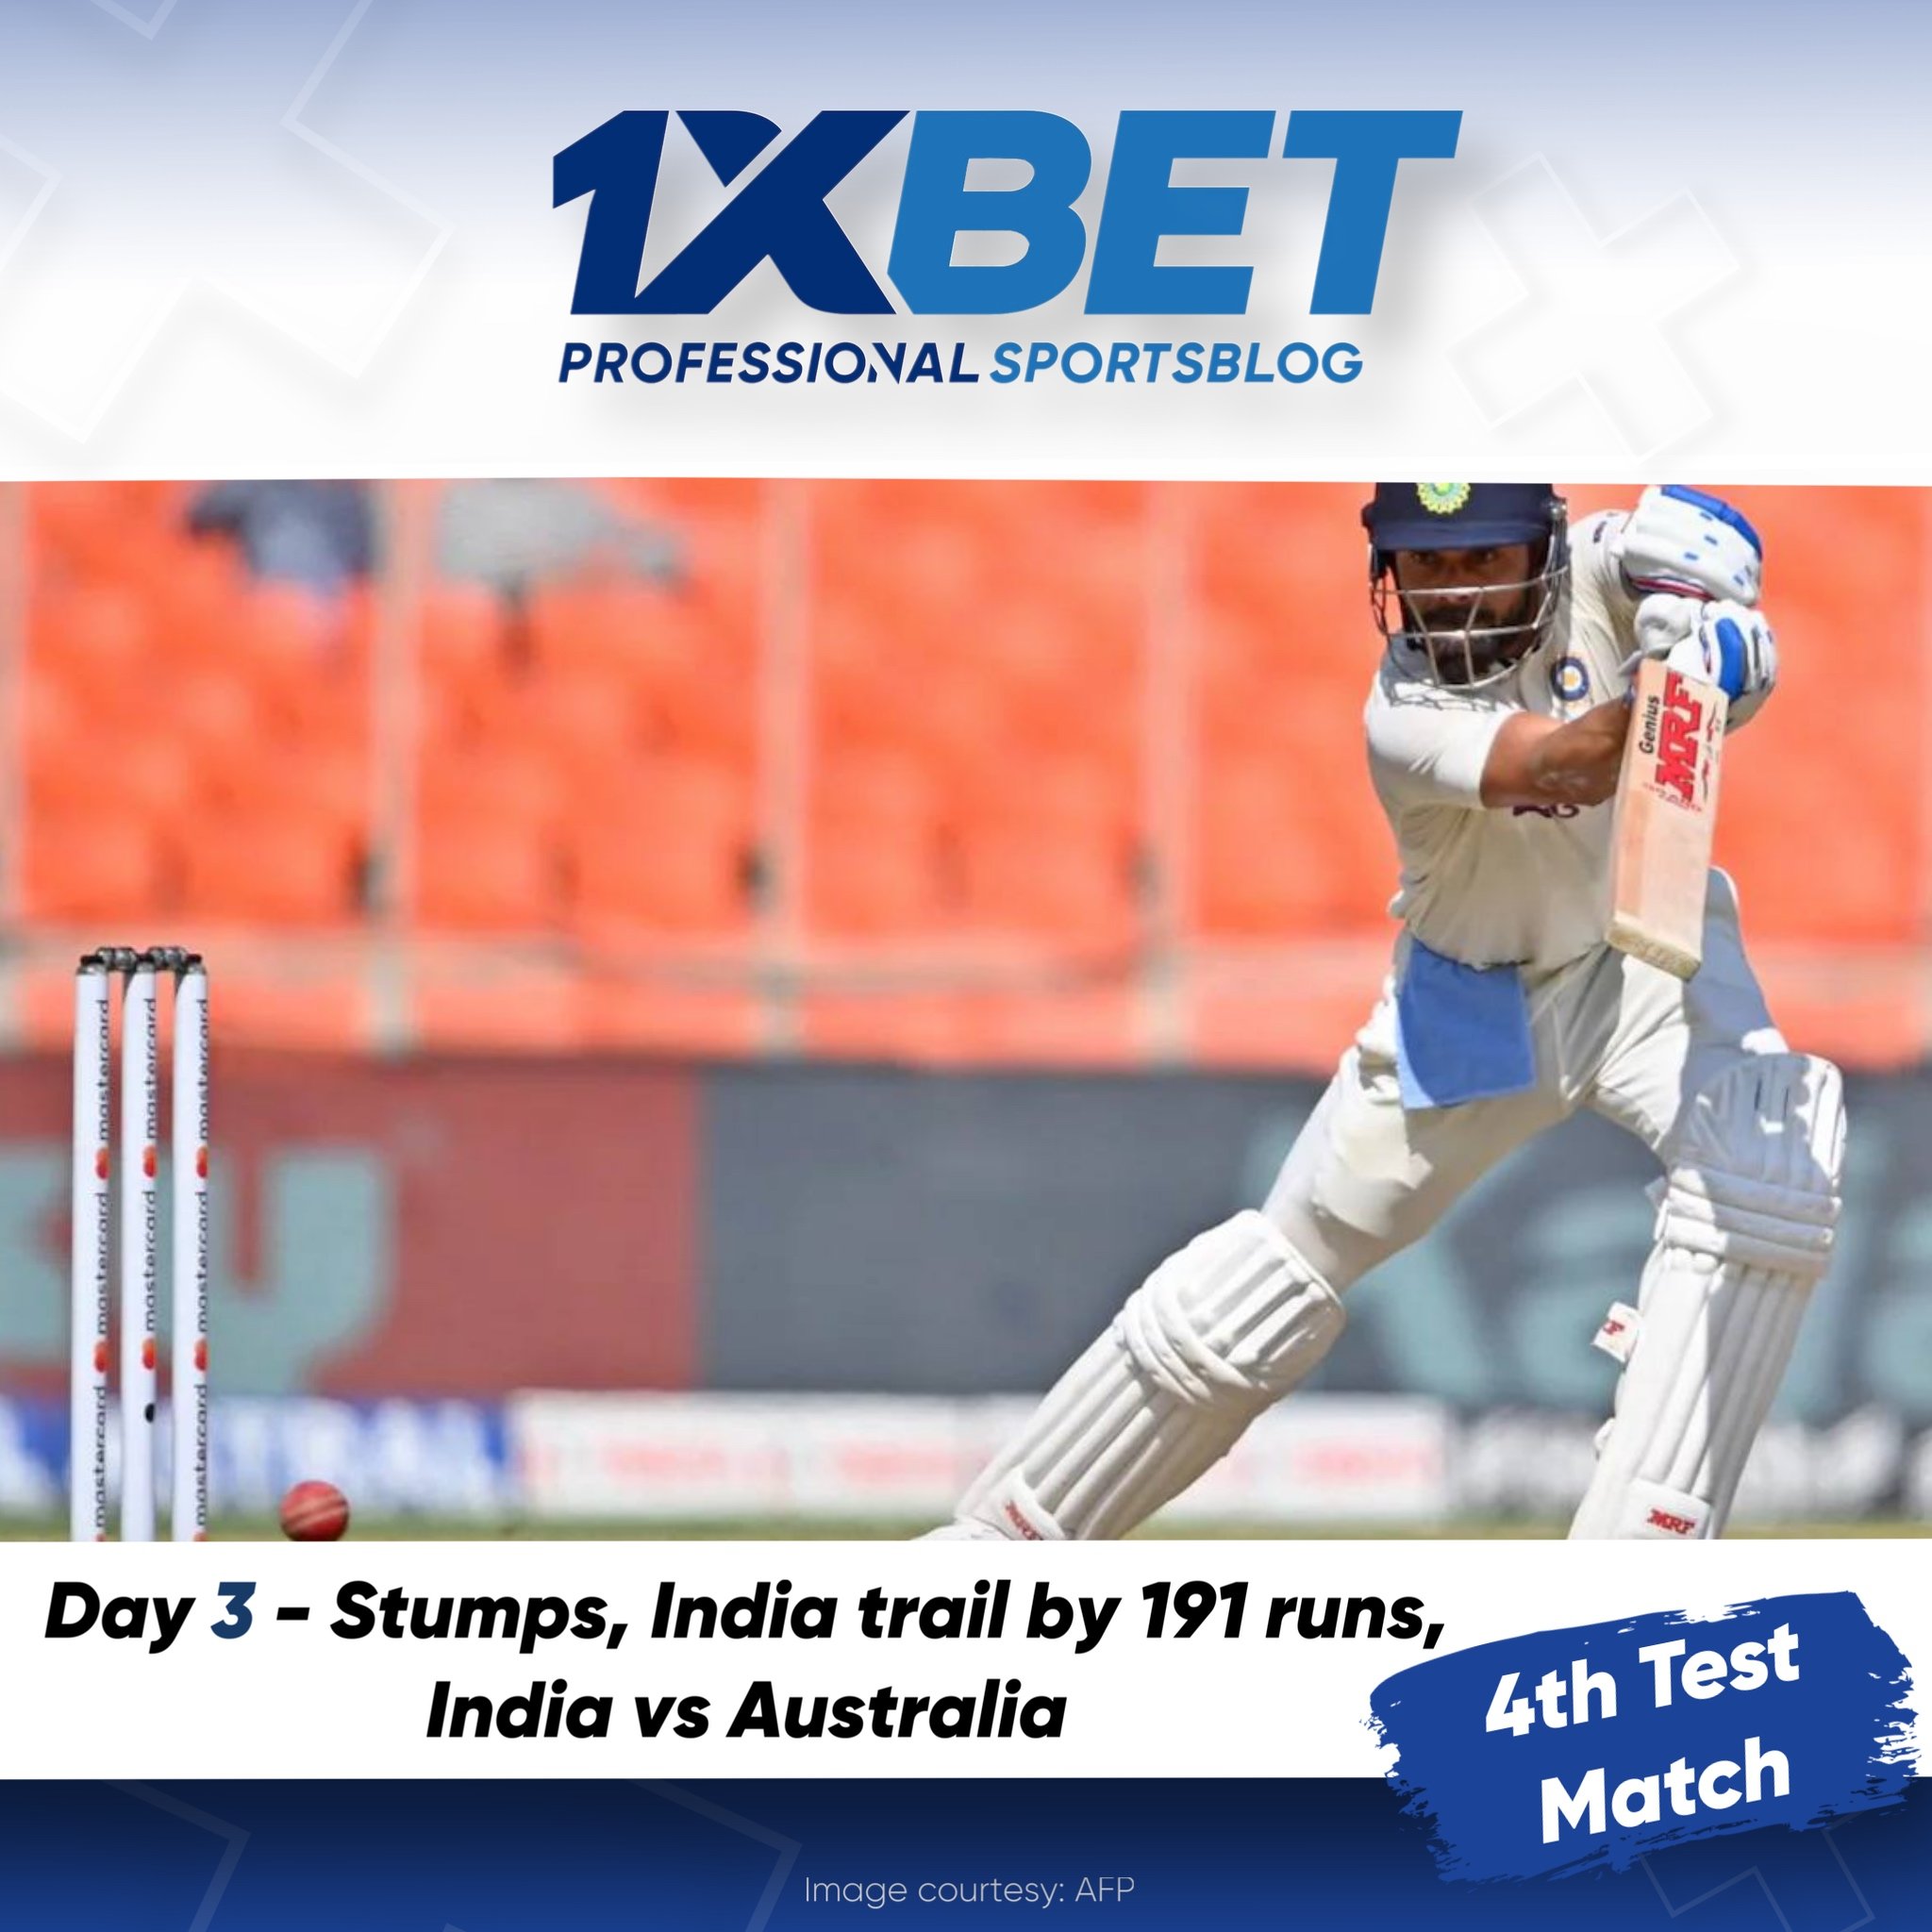 Day 3 - Stumps, India trail by 191 runs